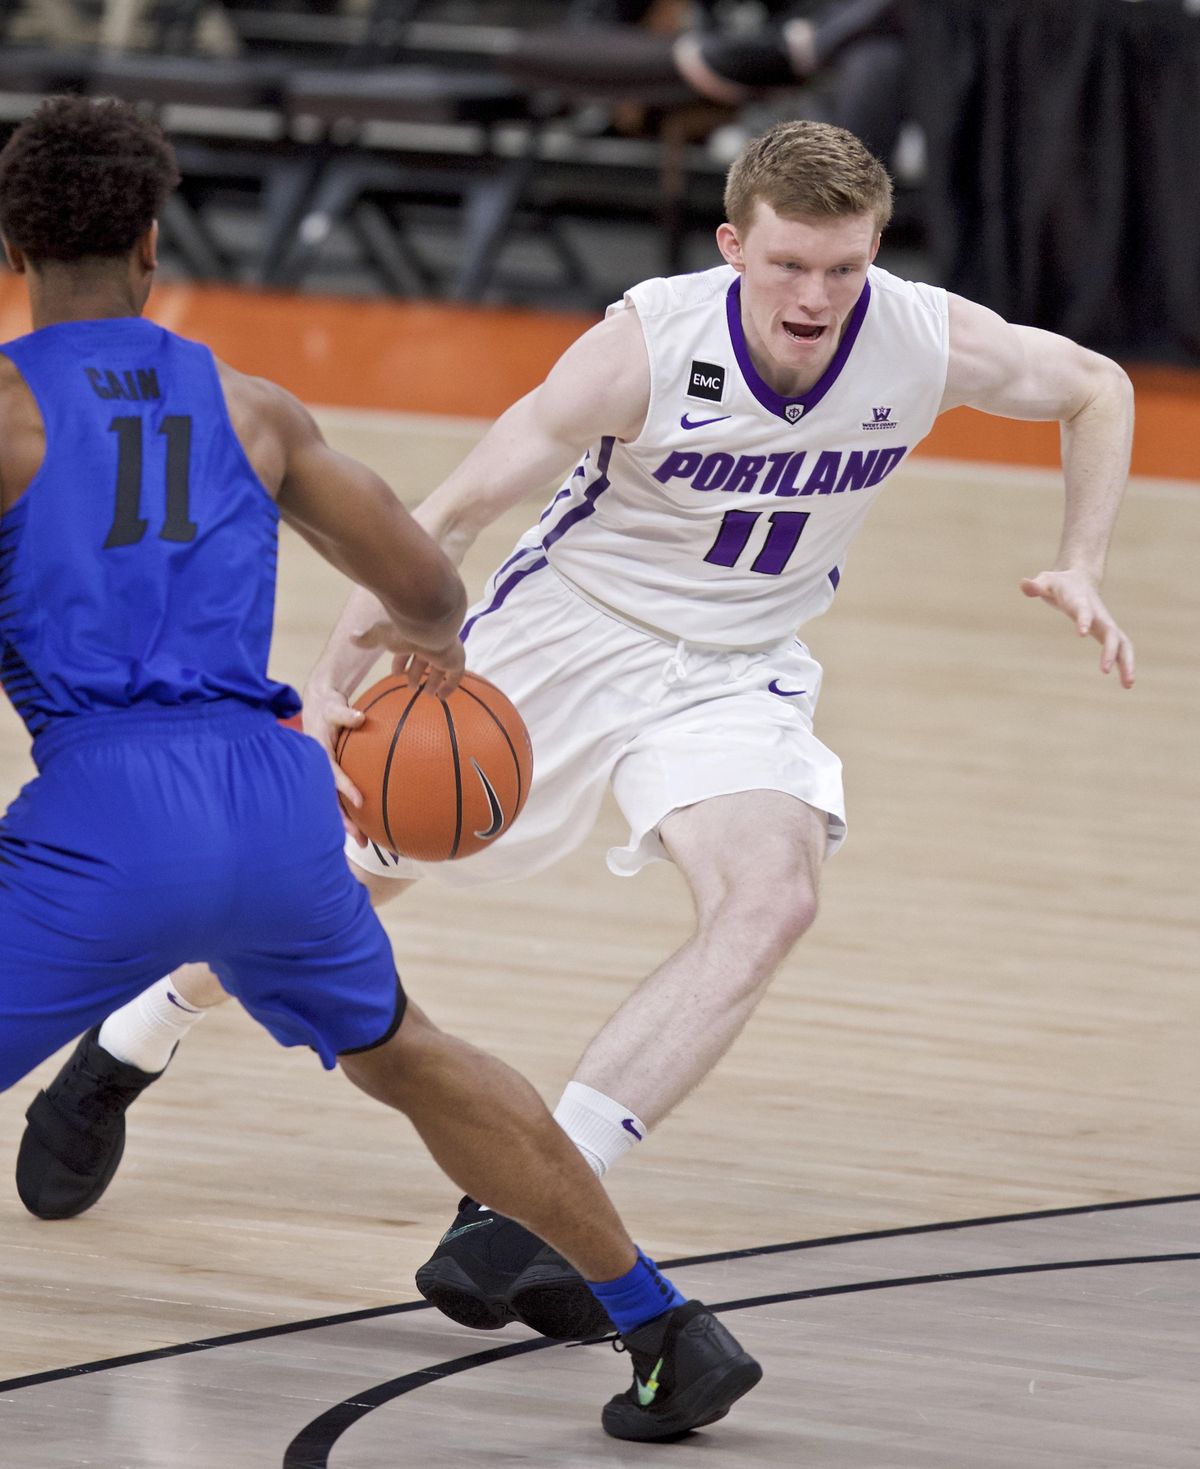 Portland guard Josh McSwiggan, right, dribbles past DePaul guard Eli Cain during the first half of an NCAA college basketball game in the Phil Knight Invitational tournament in Portland, Ore., Sunday, Nov. 26, 2017. (Craig Mitchelldyer / Associated Press)